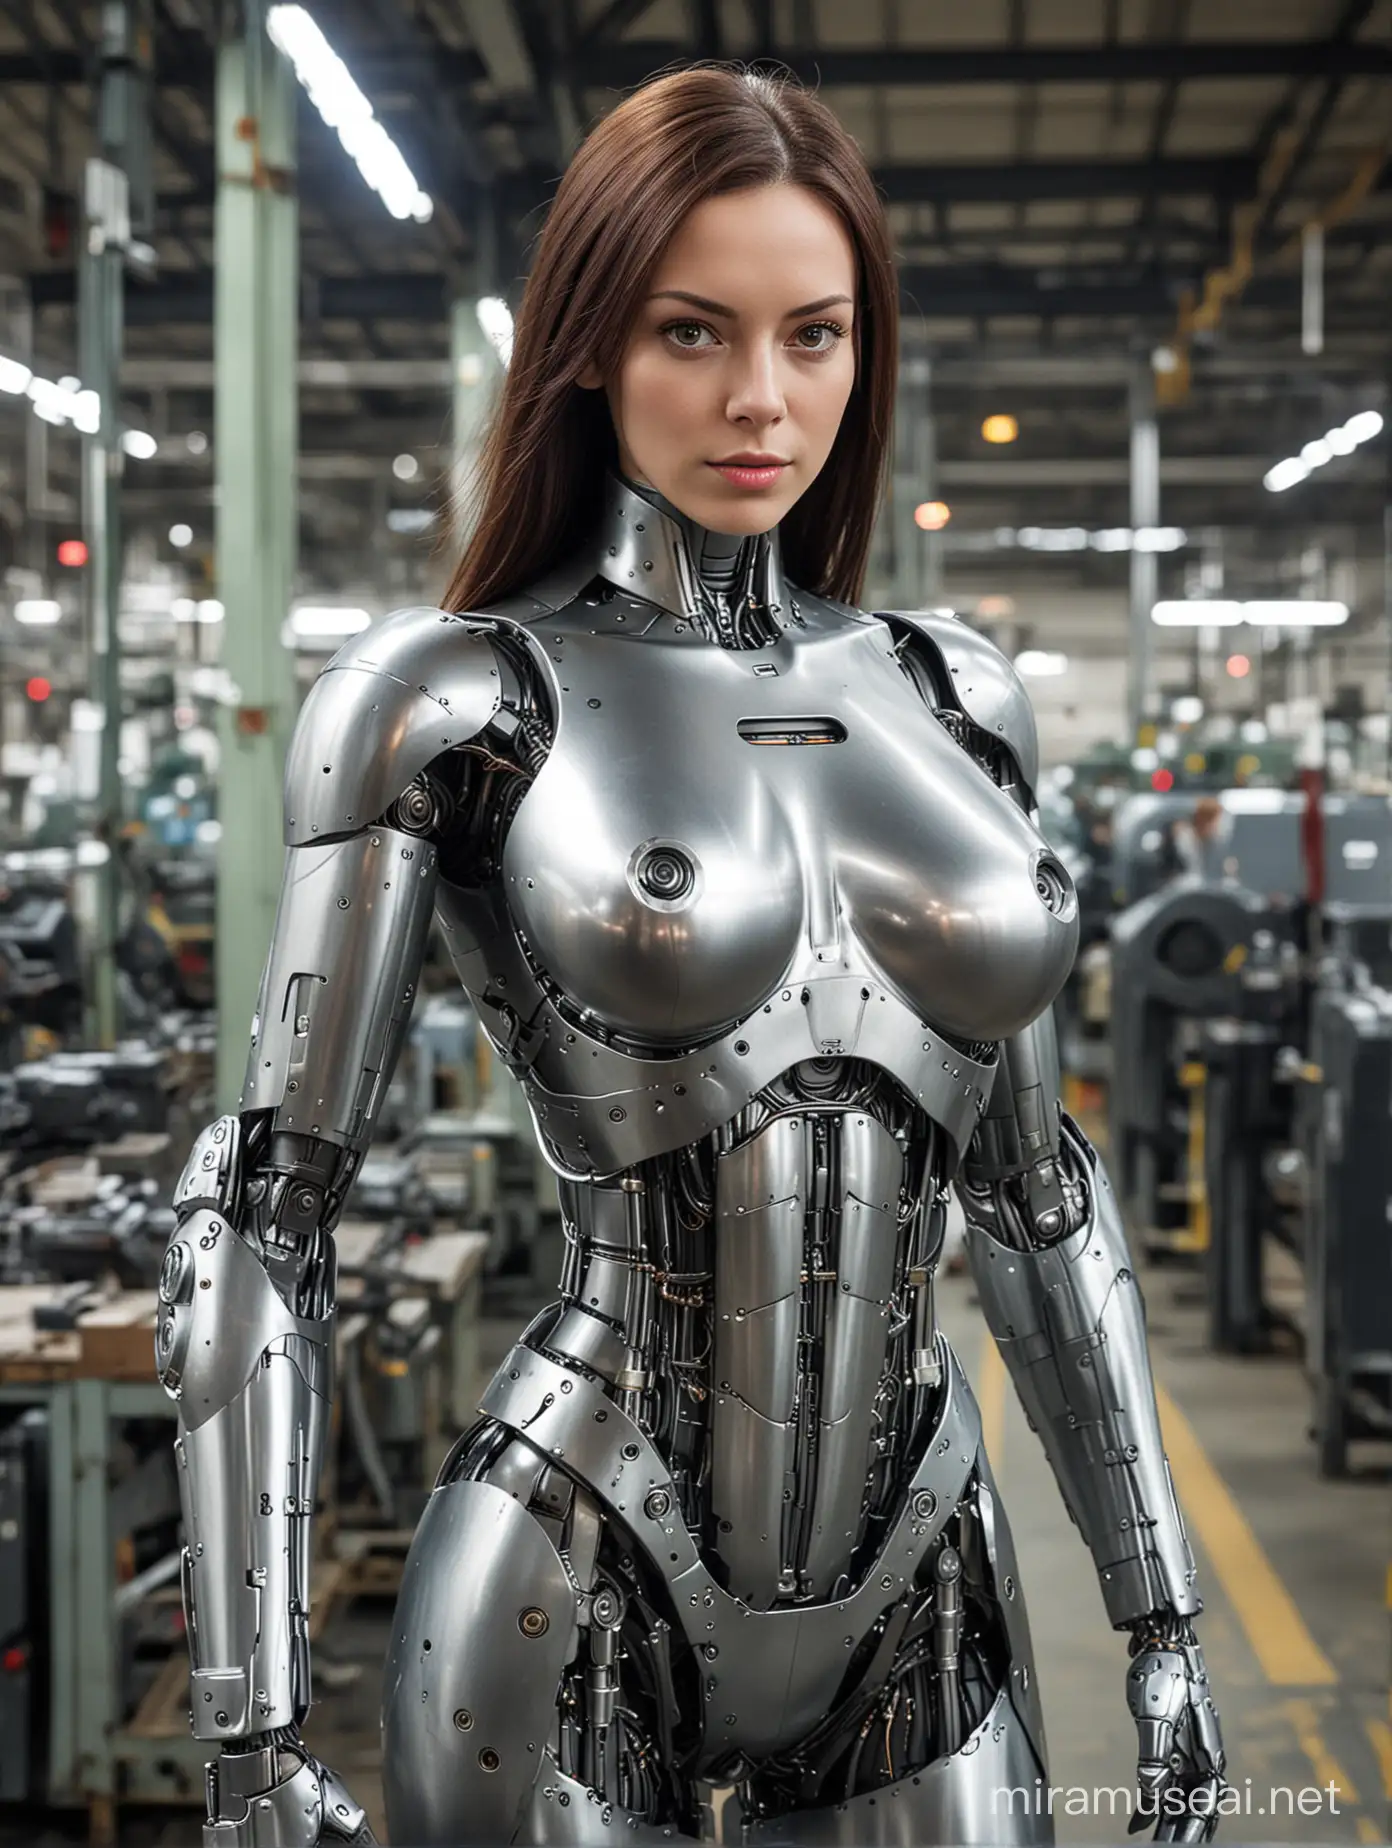 Futuristic Android with Humanlike Features on Factory Floor